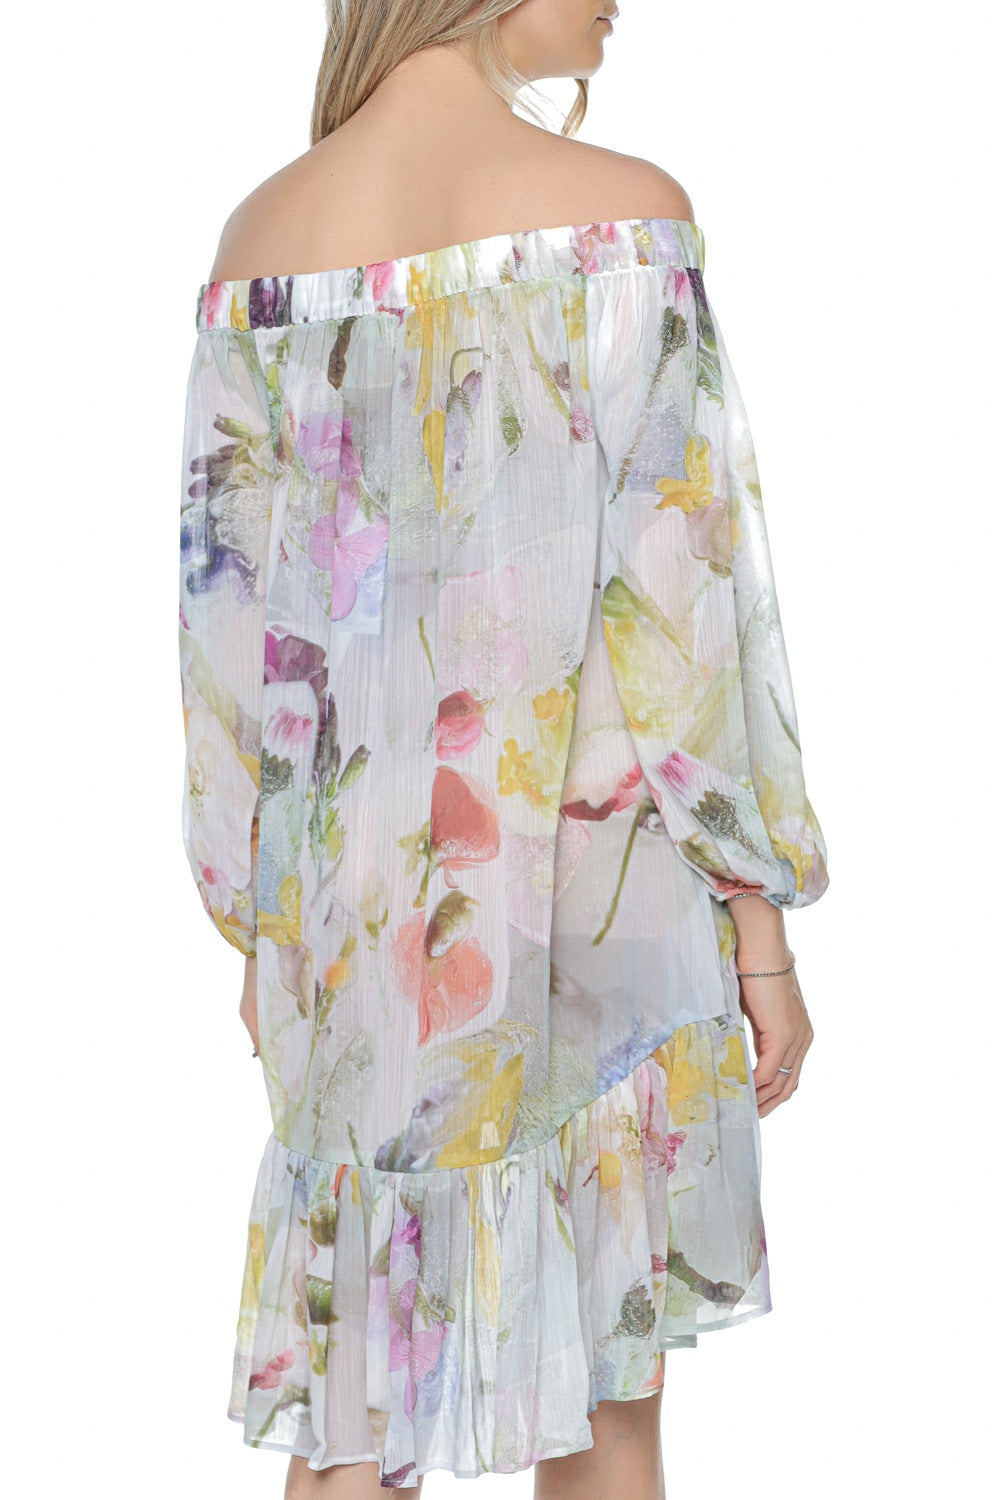 Pareo Ted Baker Dashan-Off The Shoulder Cover